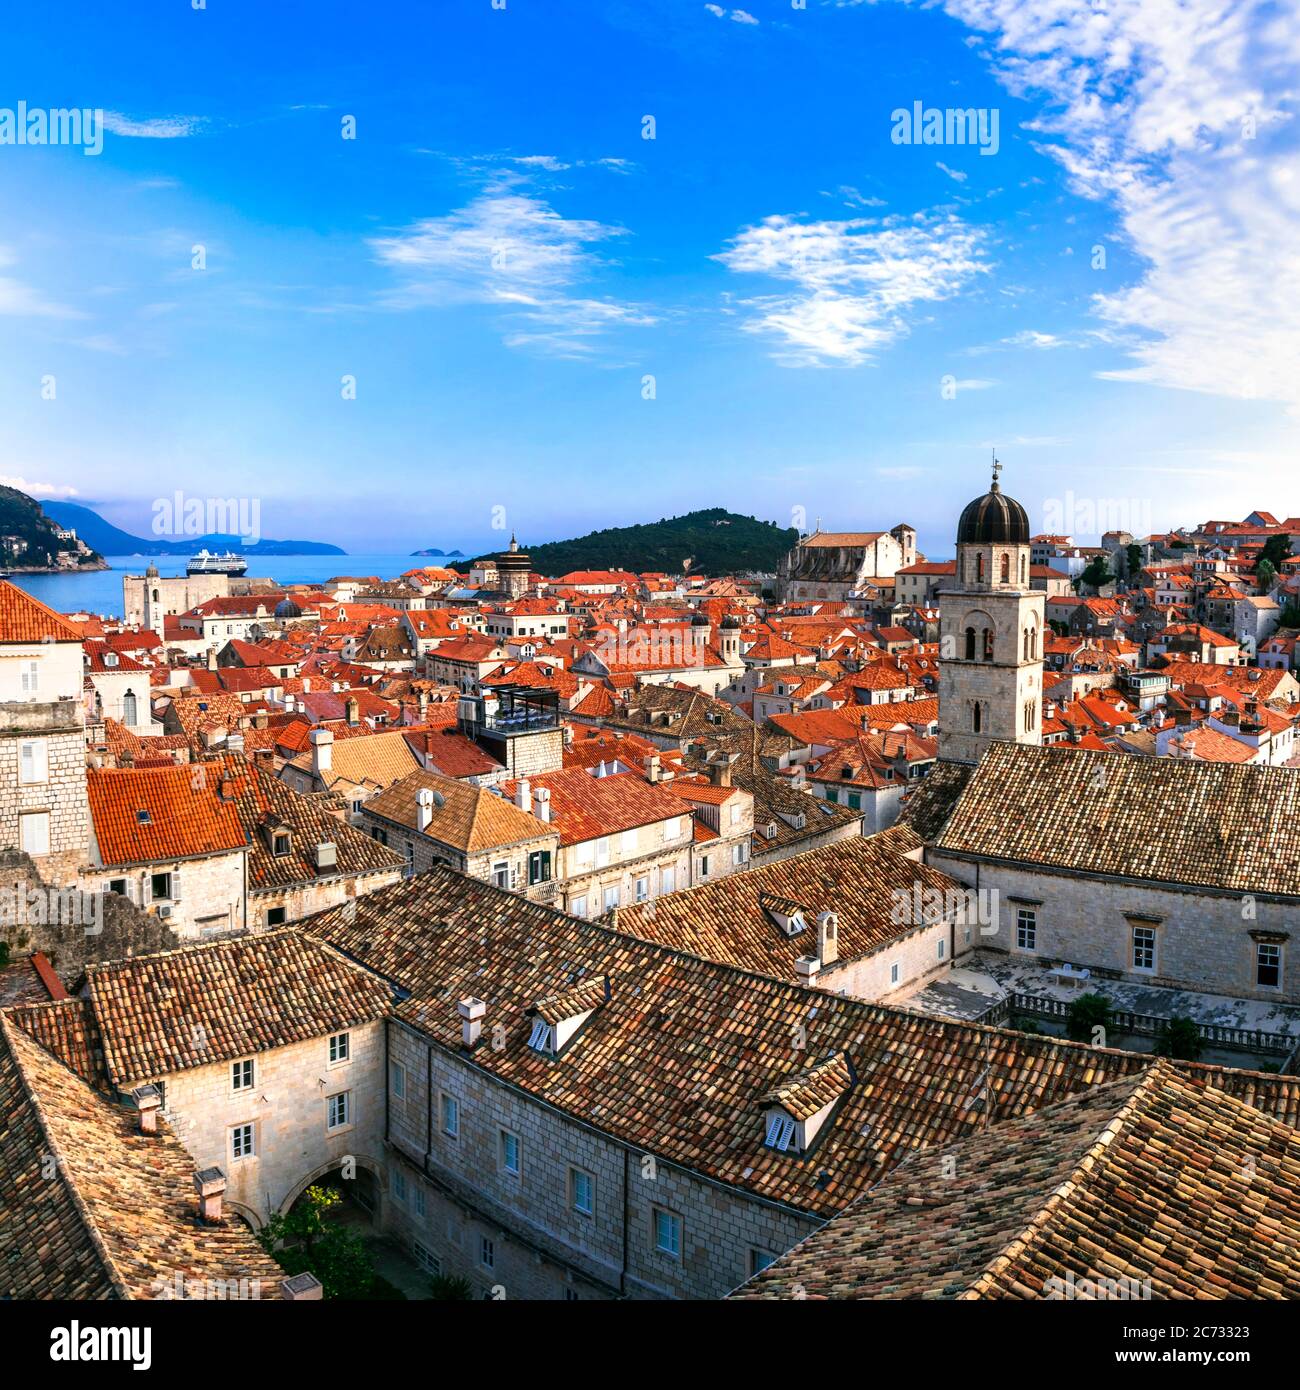 Croatia travel. Dubrovnik. view from city wall in historic old town center Stock Photo